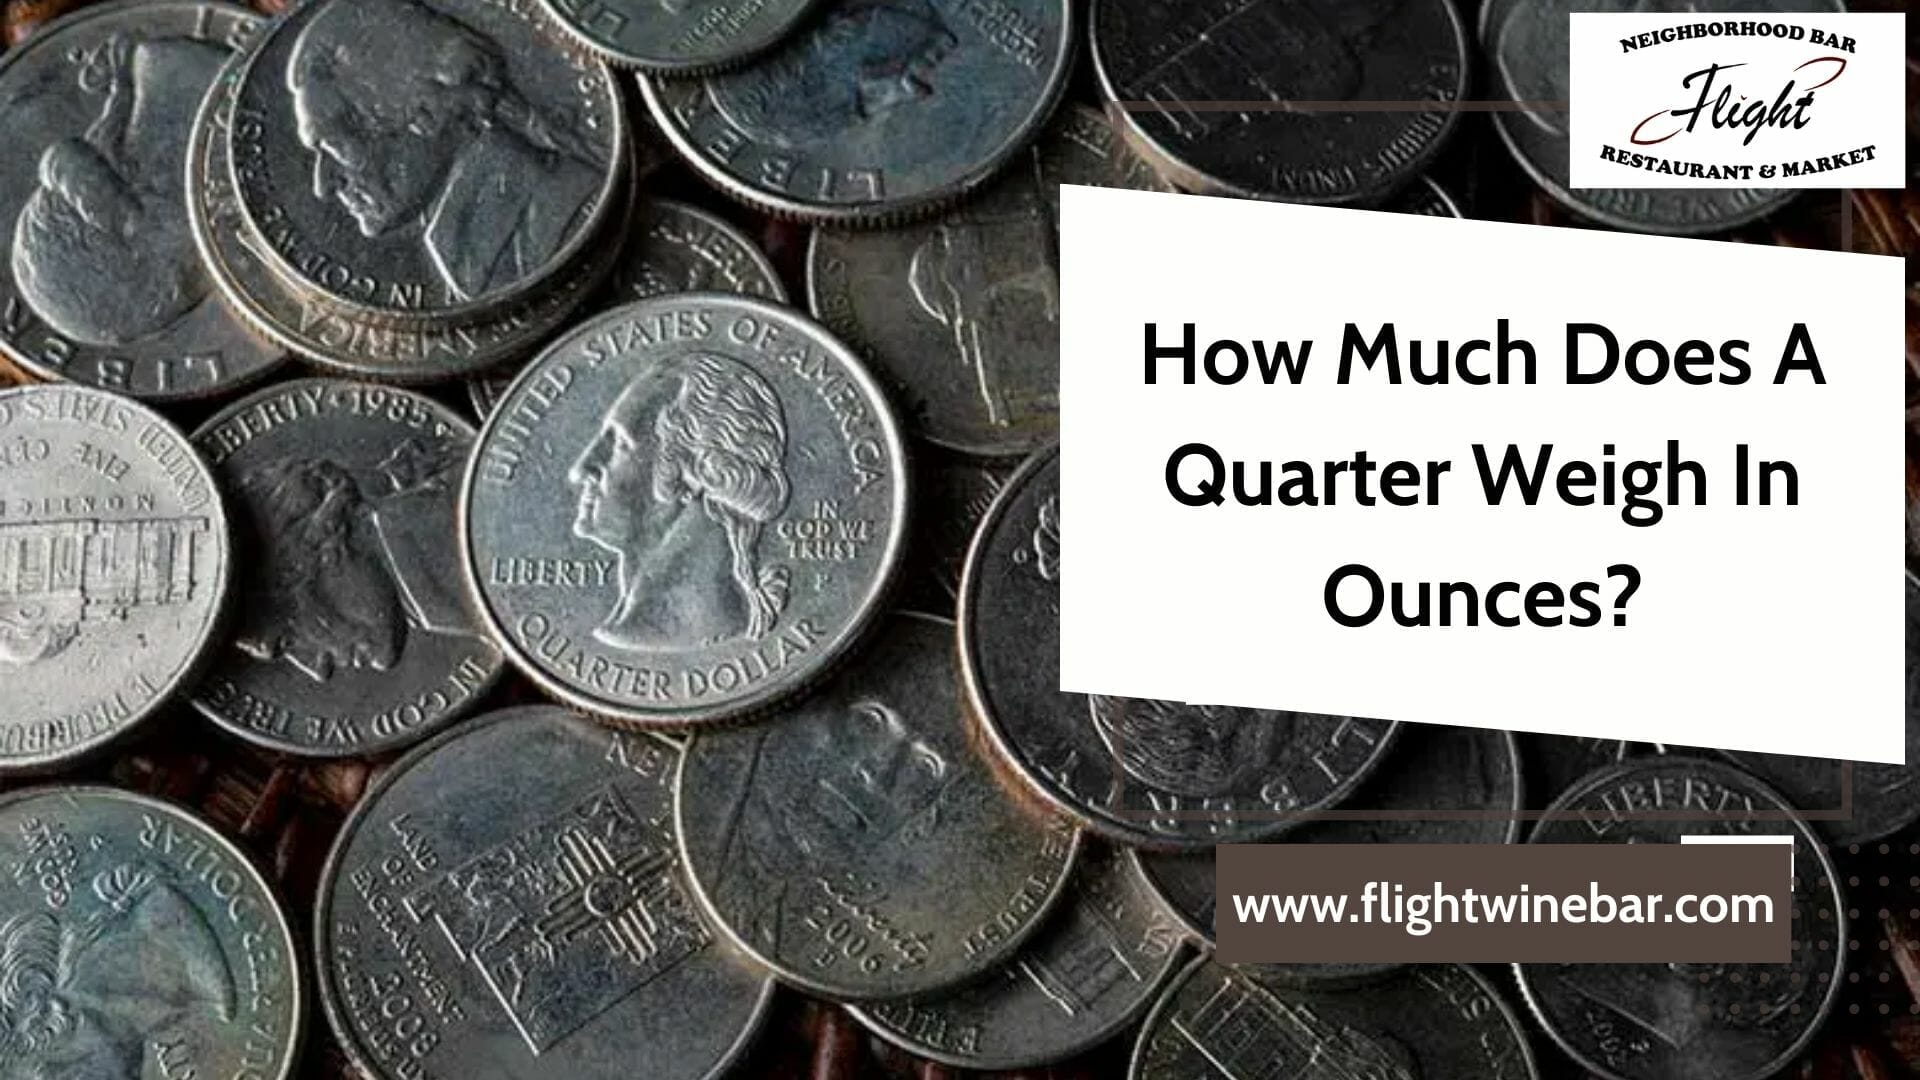 How Much Does A Quarter Weigh In Ounces